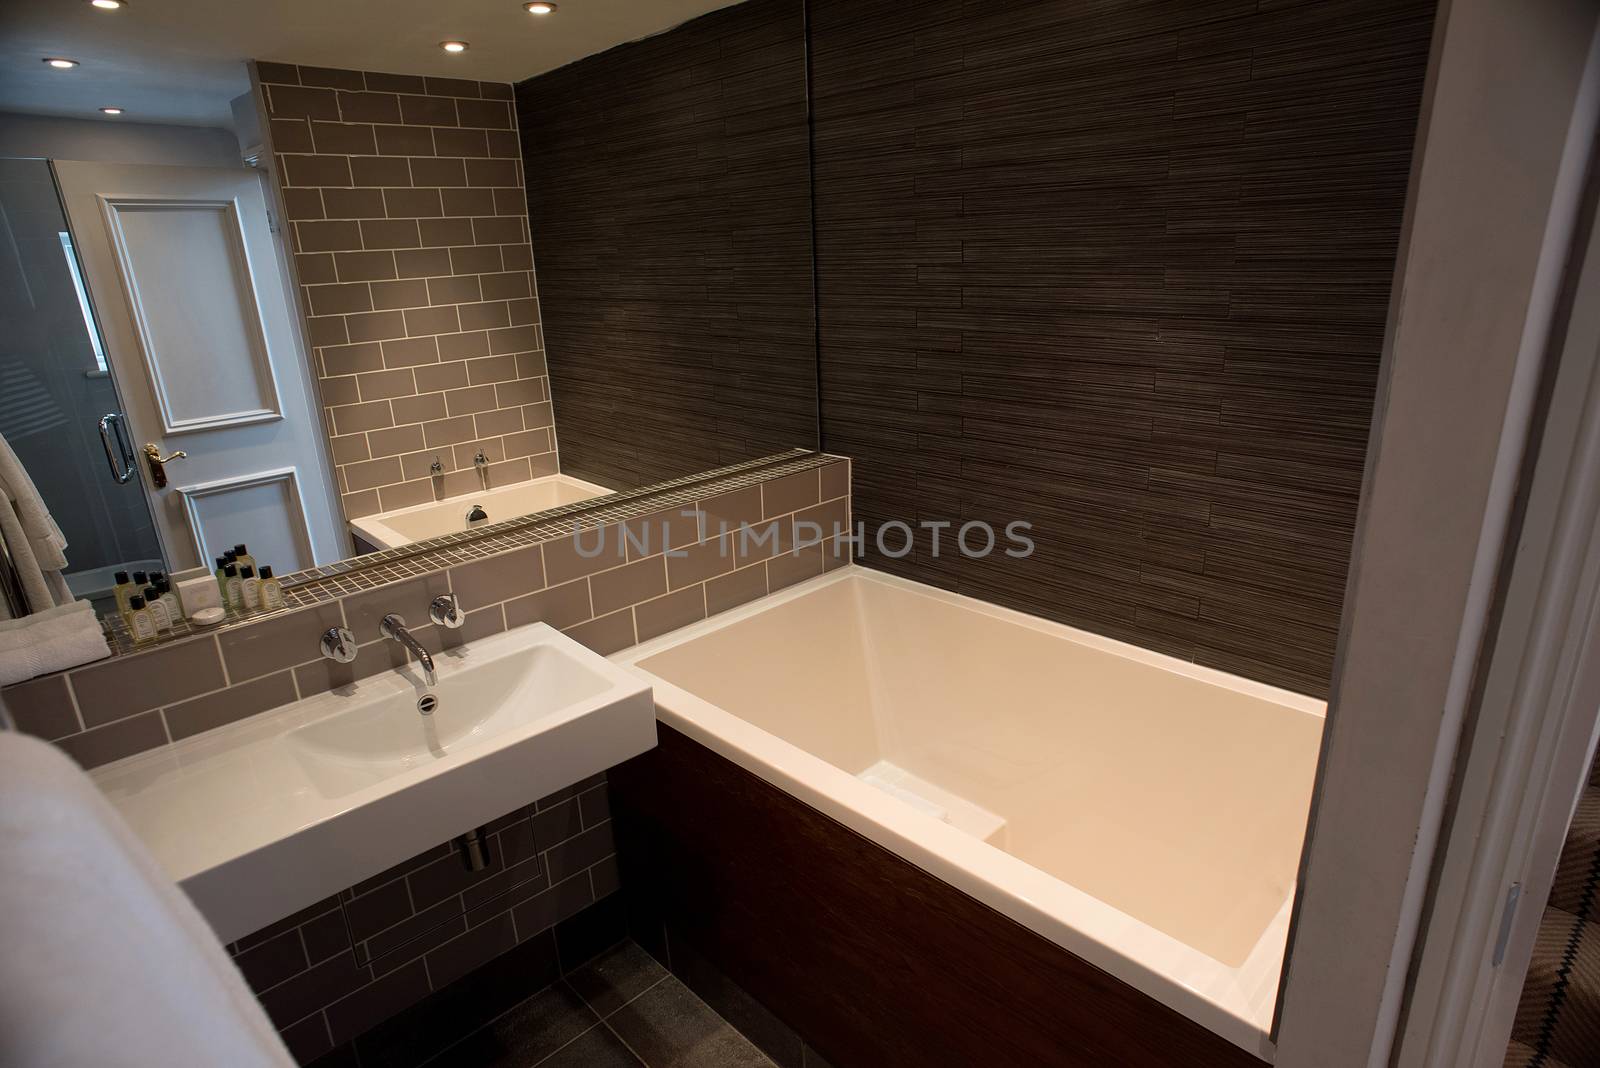 Interior of modern bathroom  by stockyimages